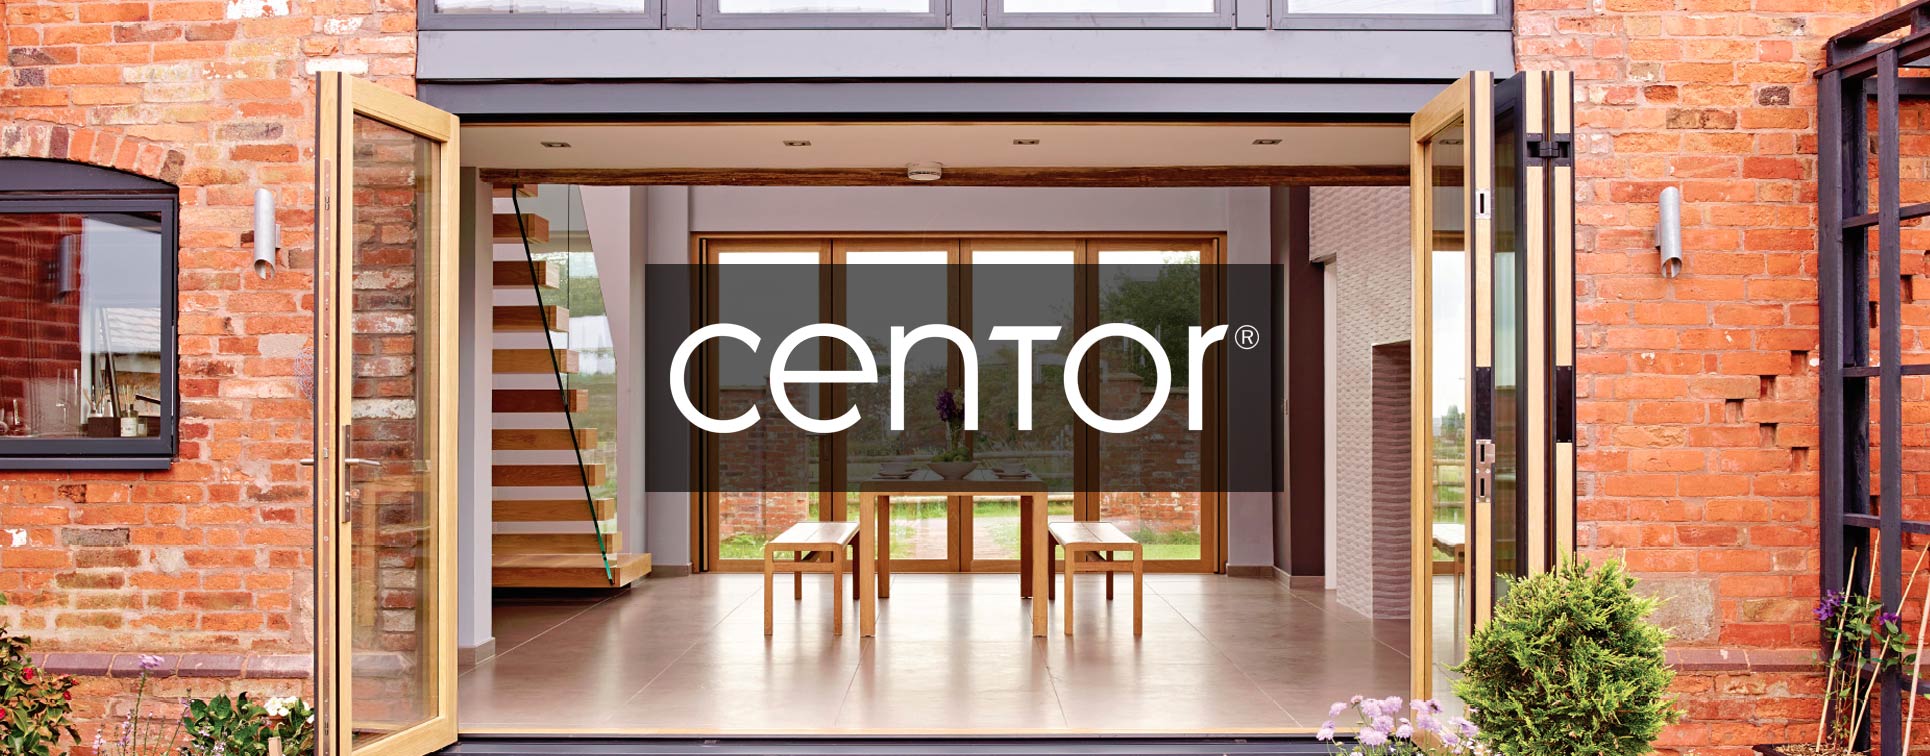 Centor integrated doors installed in a converted barn Northwich, UK.